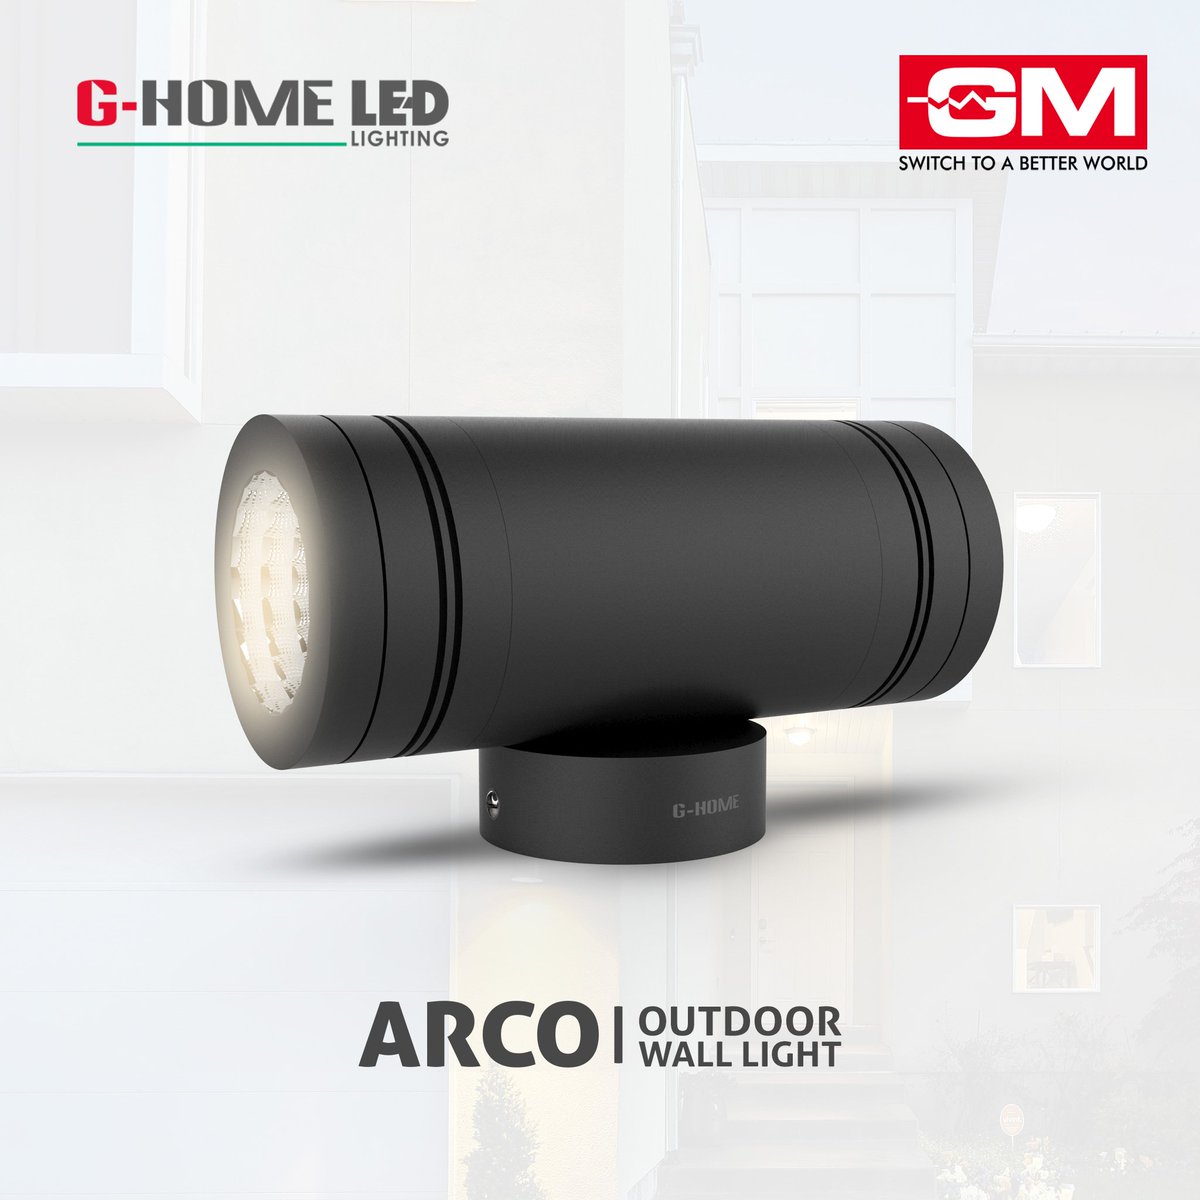 Beautify the pretty outdoor areas of your home with GM Outdoor LED wall lights.

#gmmodular #homeautomation #smarthome #smarthomeautomation #interiordesign #uae #dubai #switches #ledlights #outdoorlighting #led #fans #Designer #uaedesign #decoredesign  #madeinindia